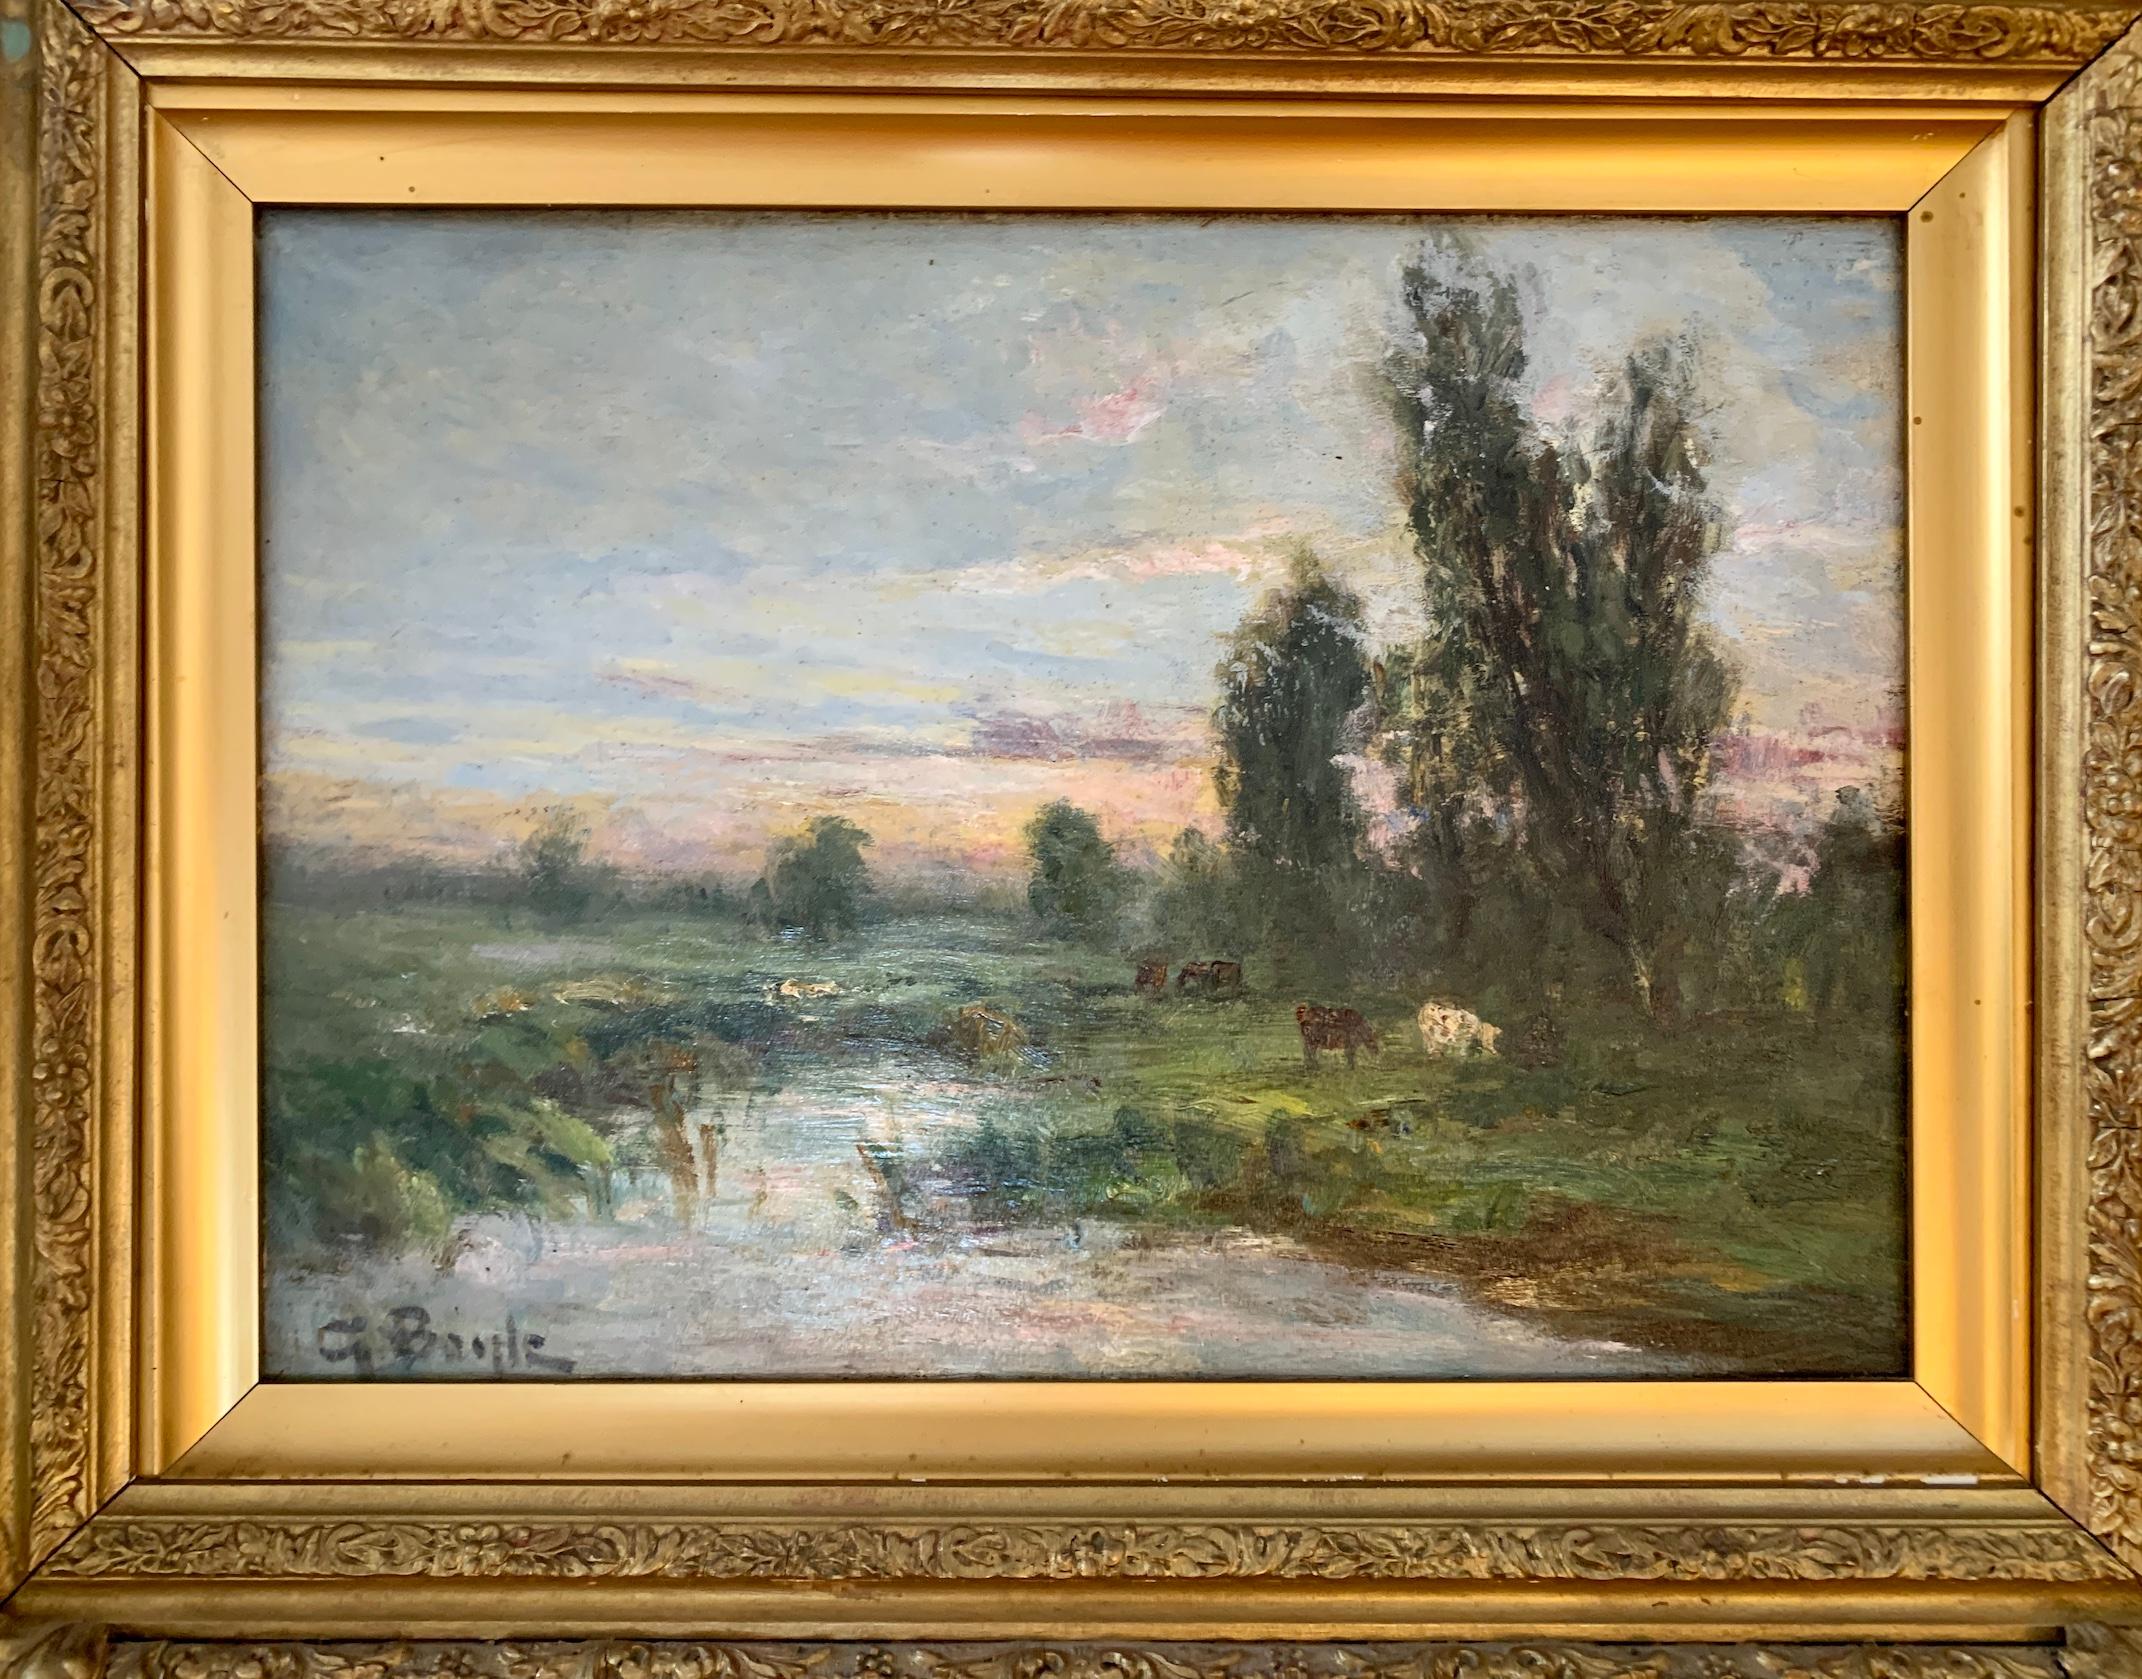 French impressionist landscape, Barbizon forest, with river and cows at Sunset - Painting by George Boyle